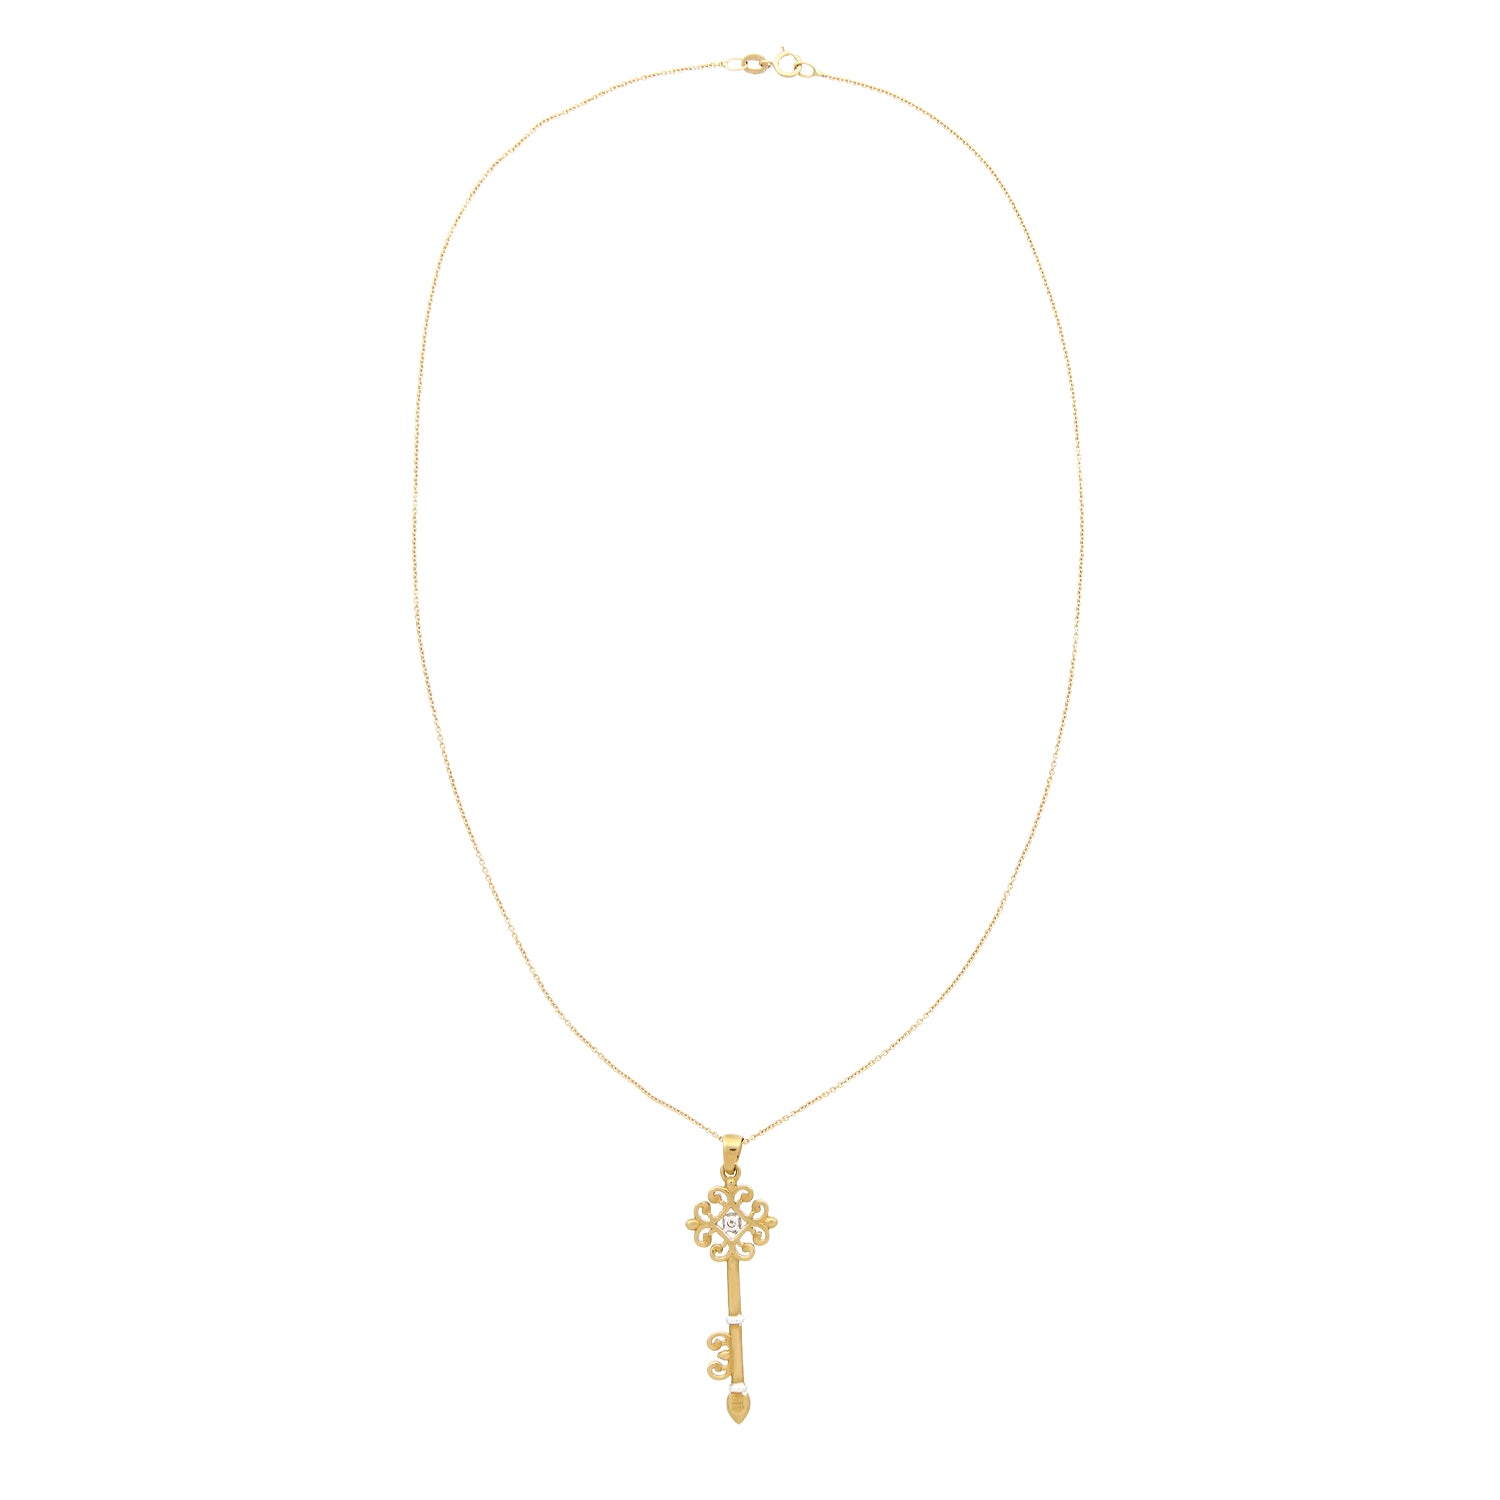 YELLOW GOLD NECKLACE WITH KEY